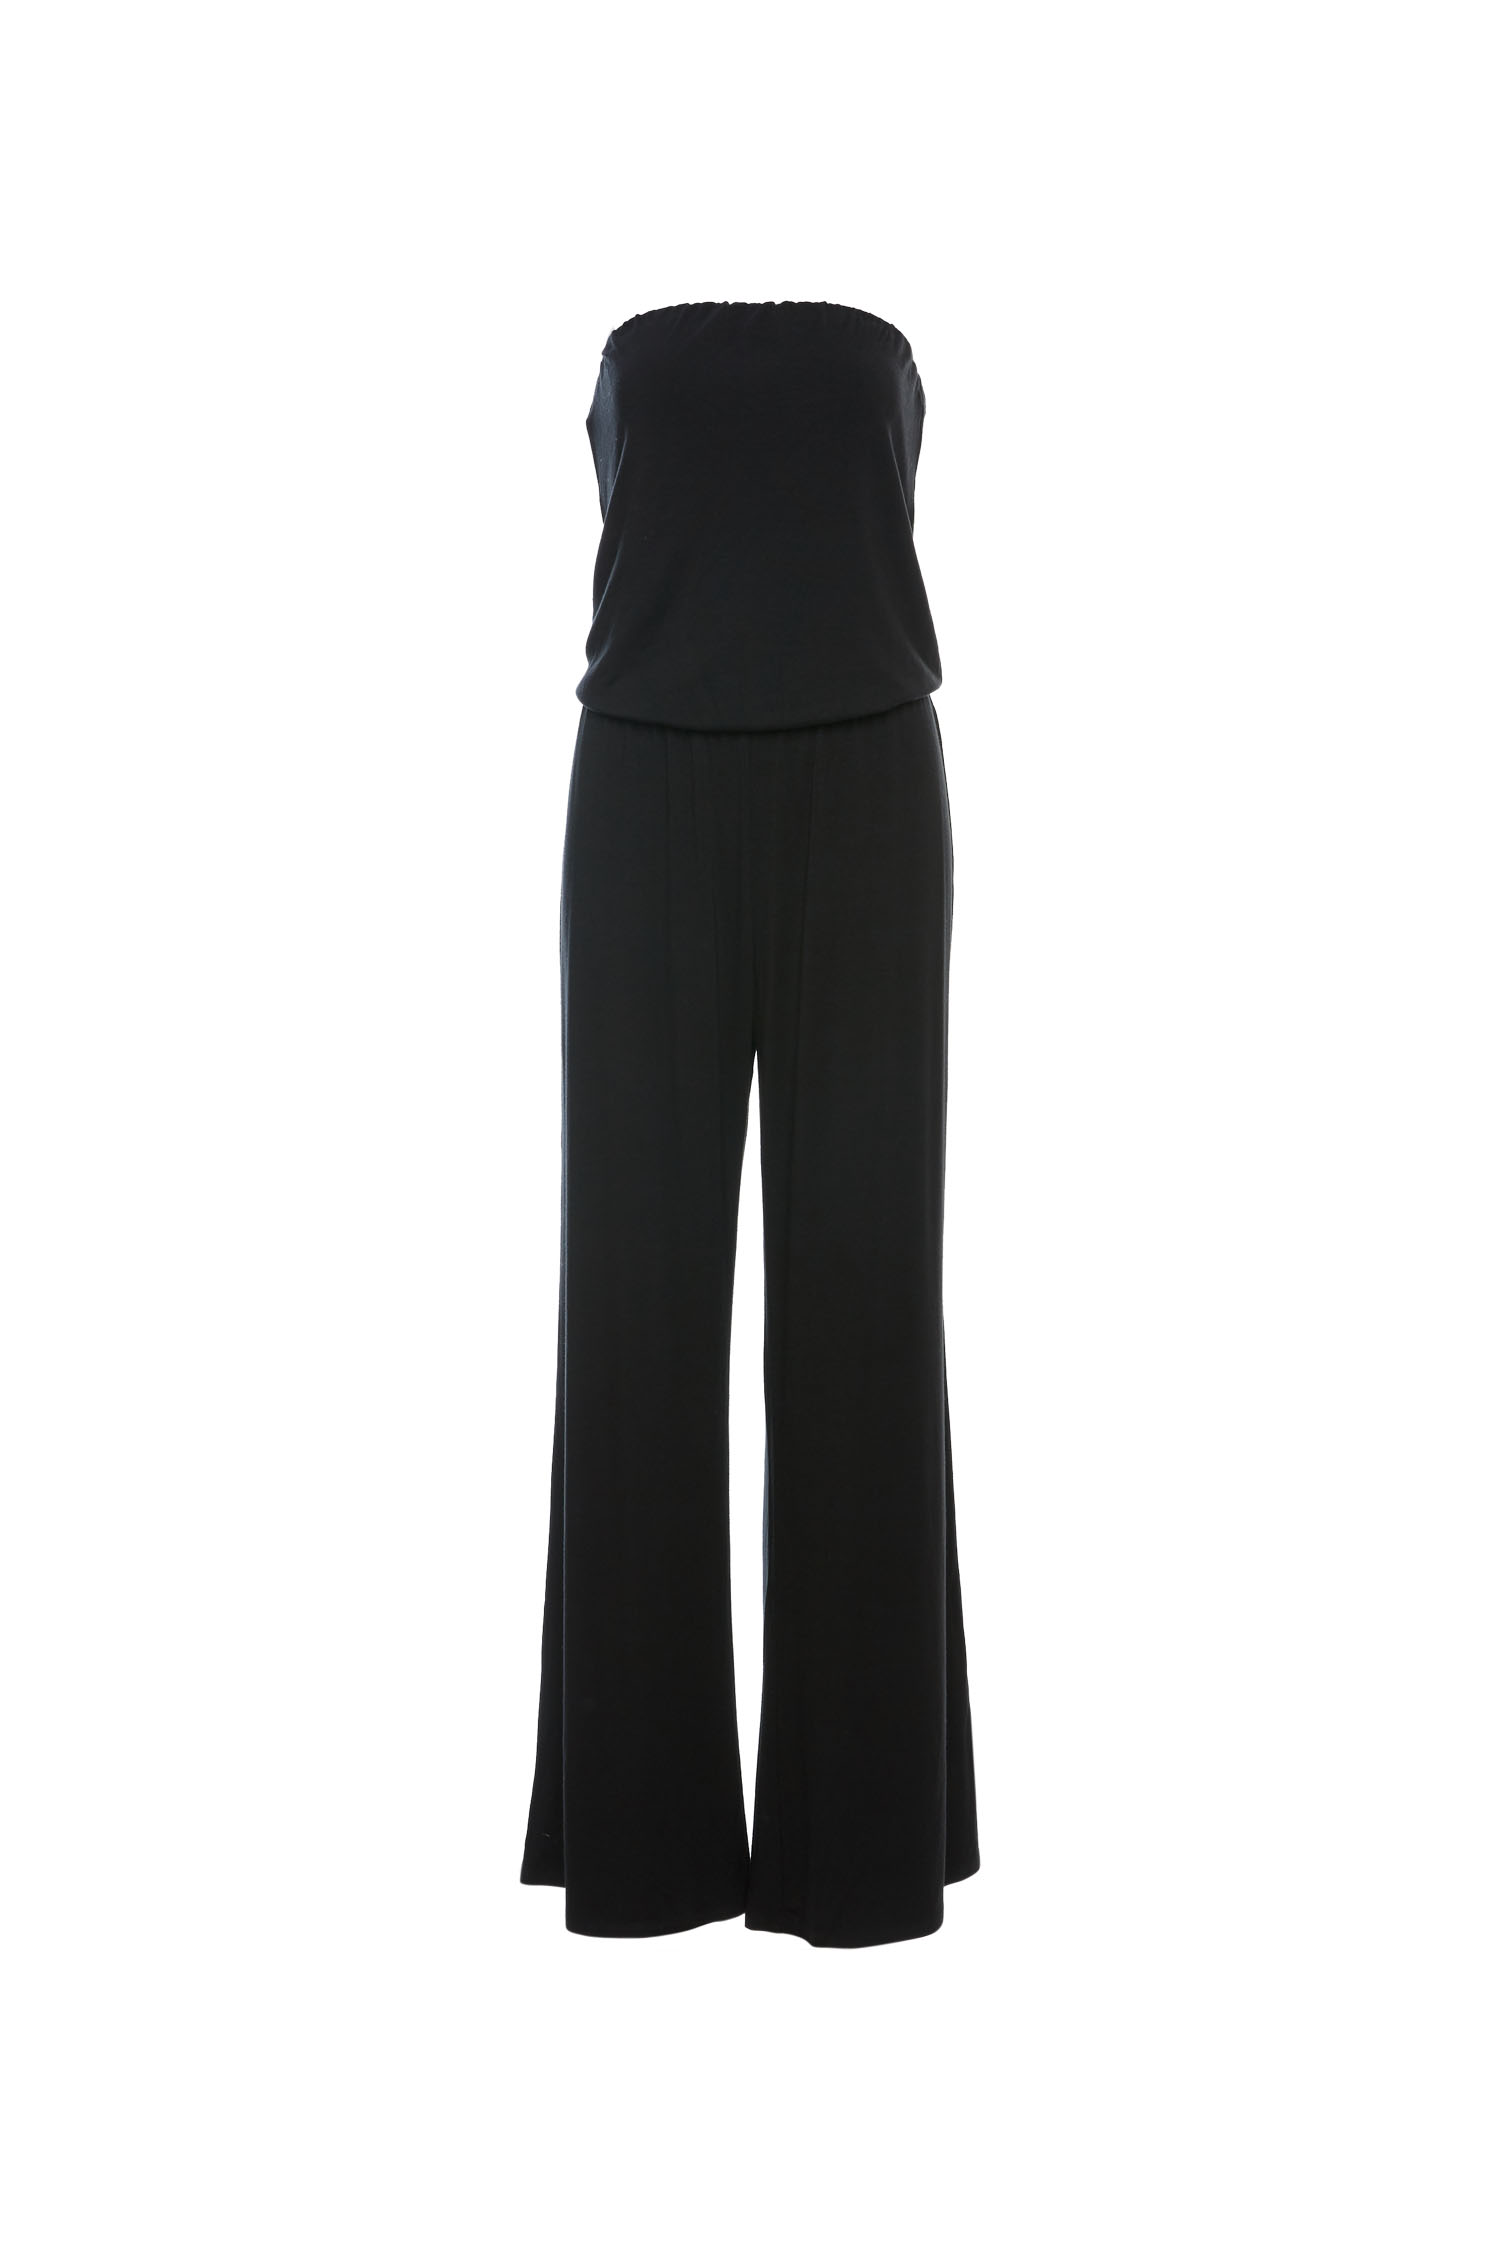 Tart Collections Val Jumpsuit in Black XS - XL | DAILYLOOK